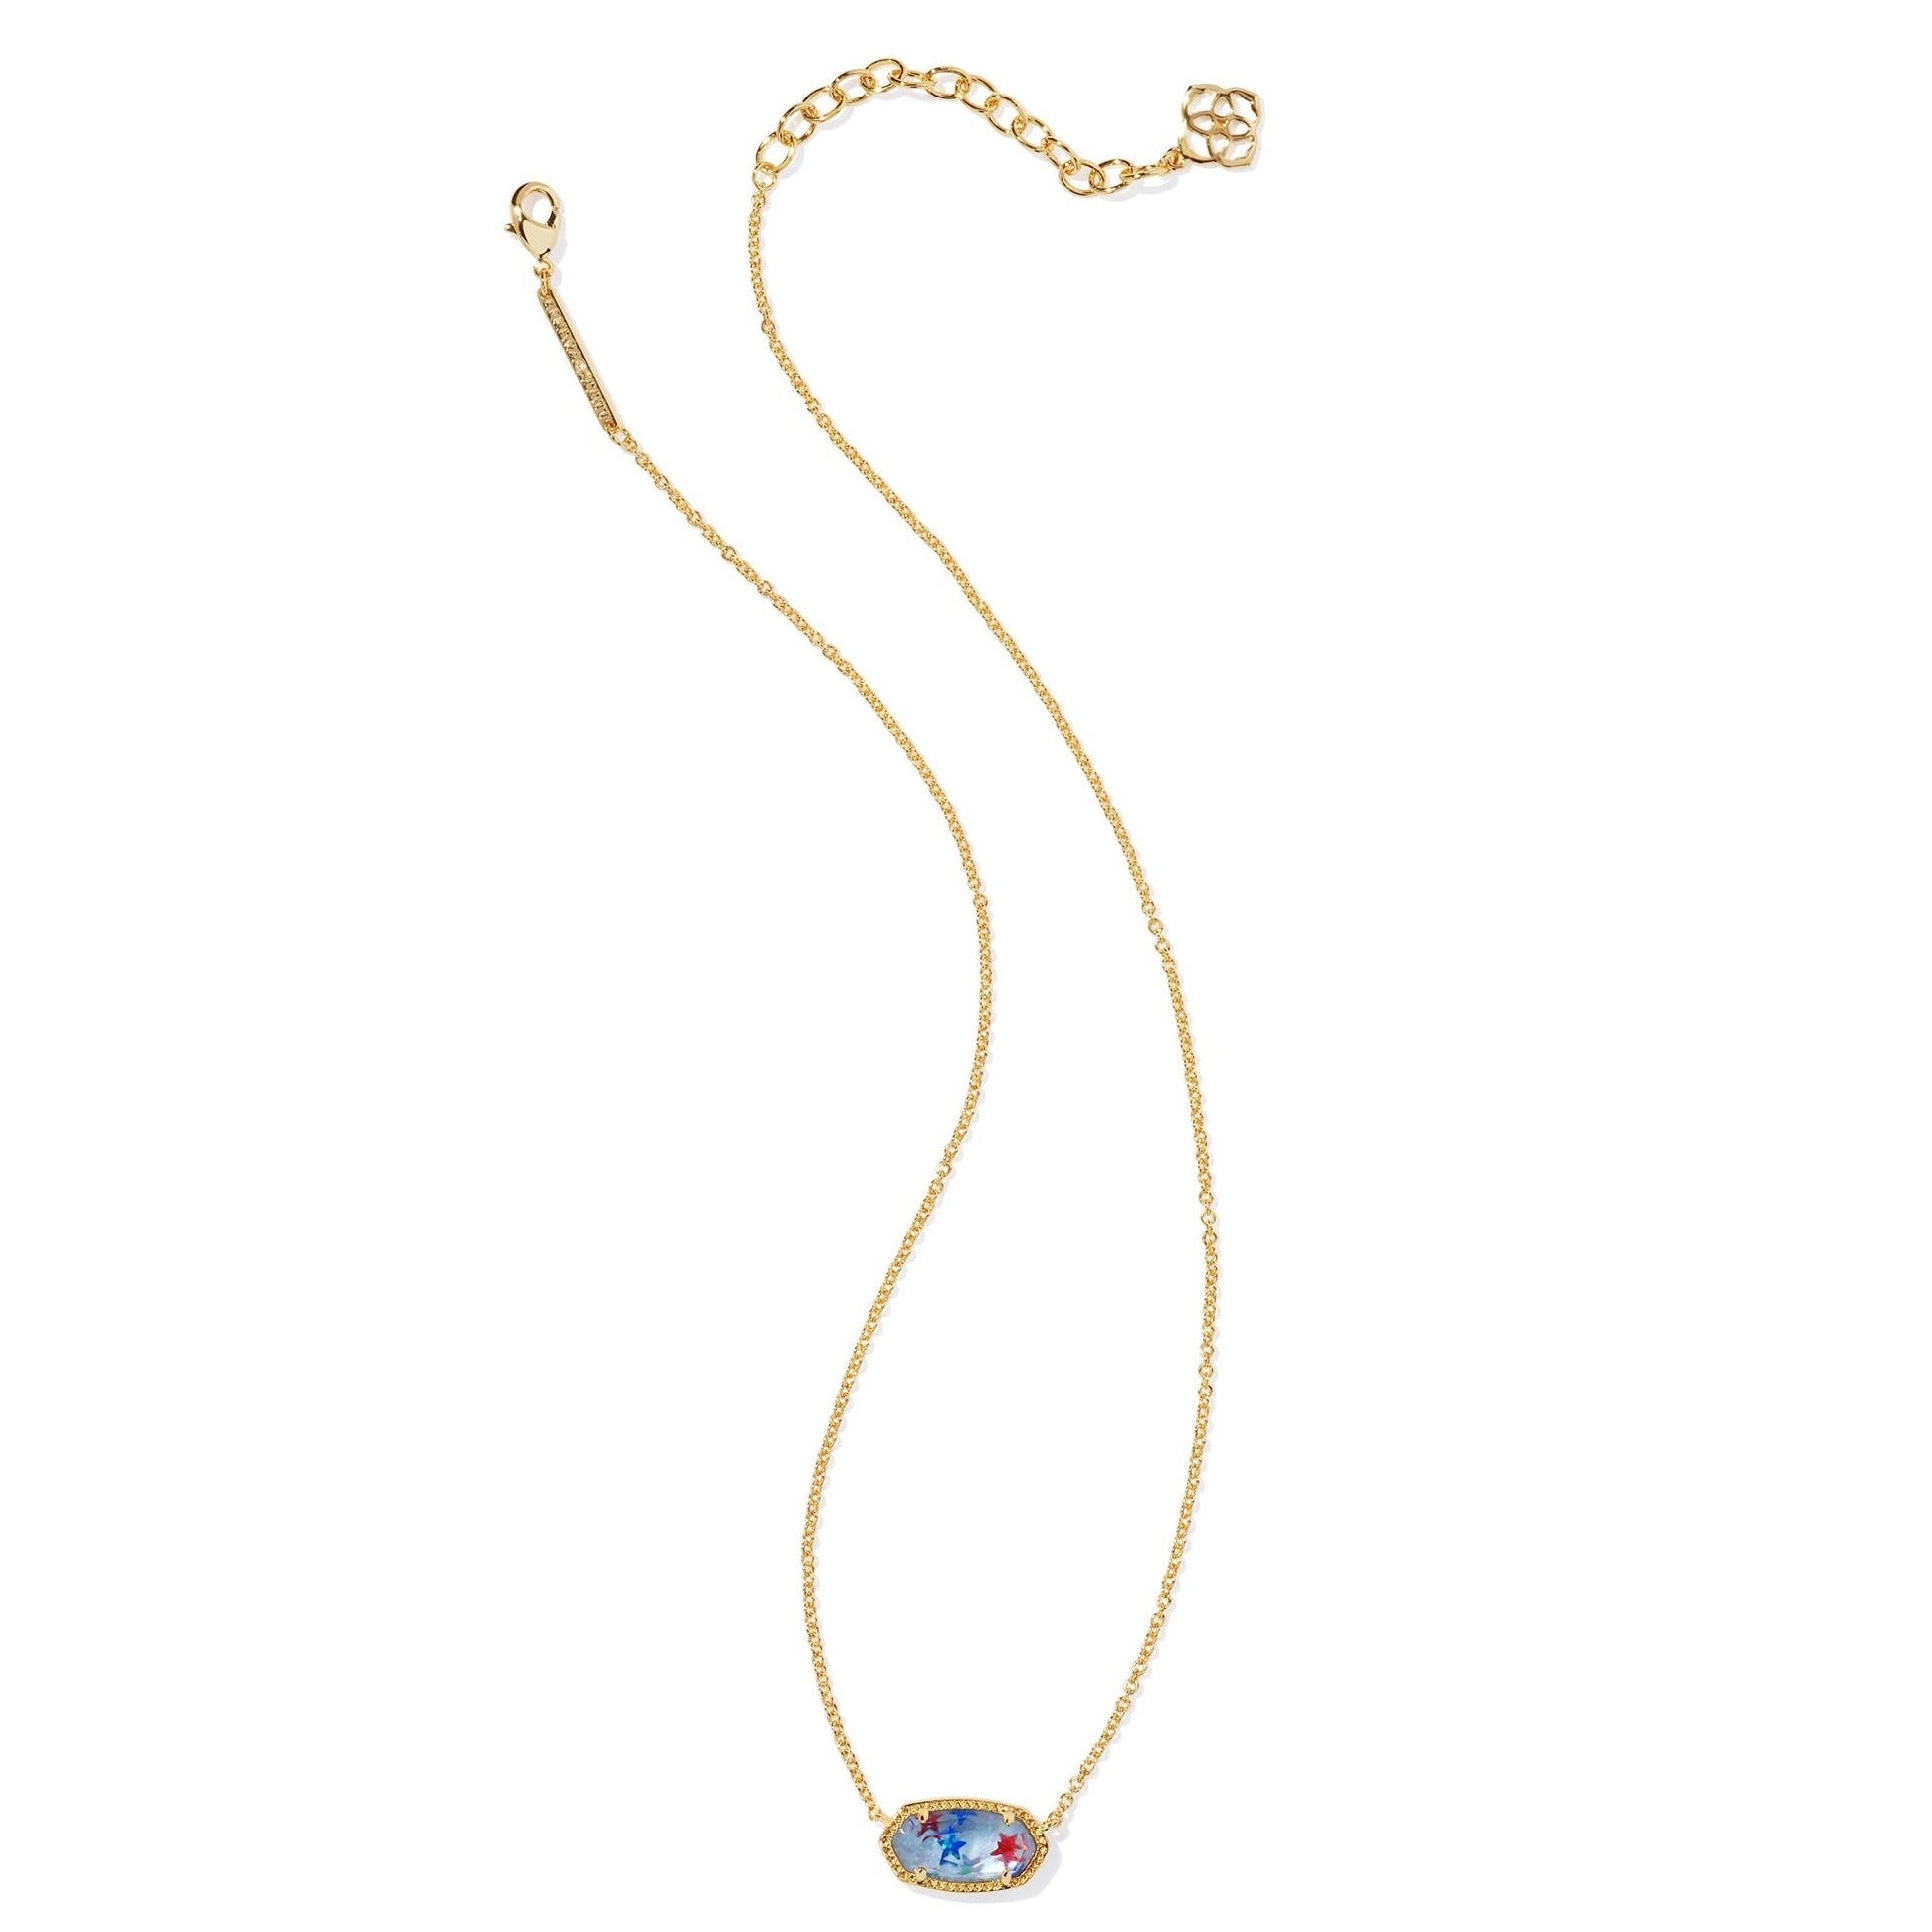 Kendra Scott | Elisa Gold Short Pendant Necklace in Red, White, and Blue Illusion - Giddy Up Glamour Boutique